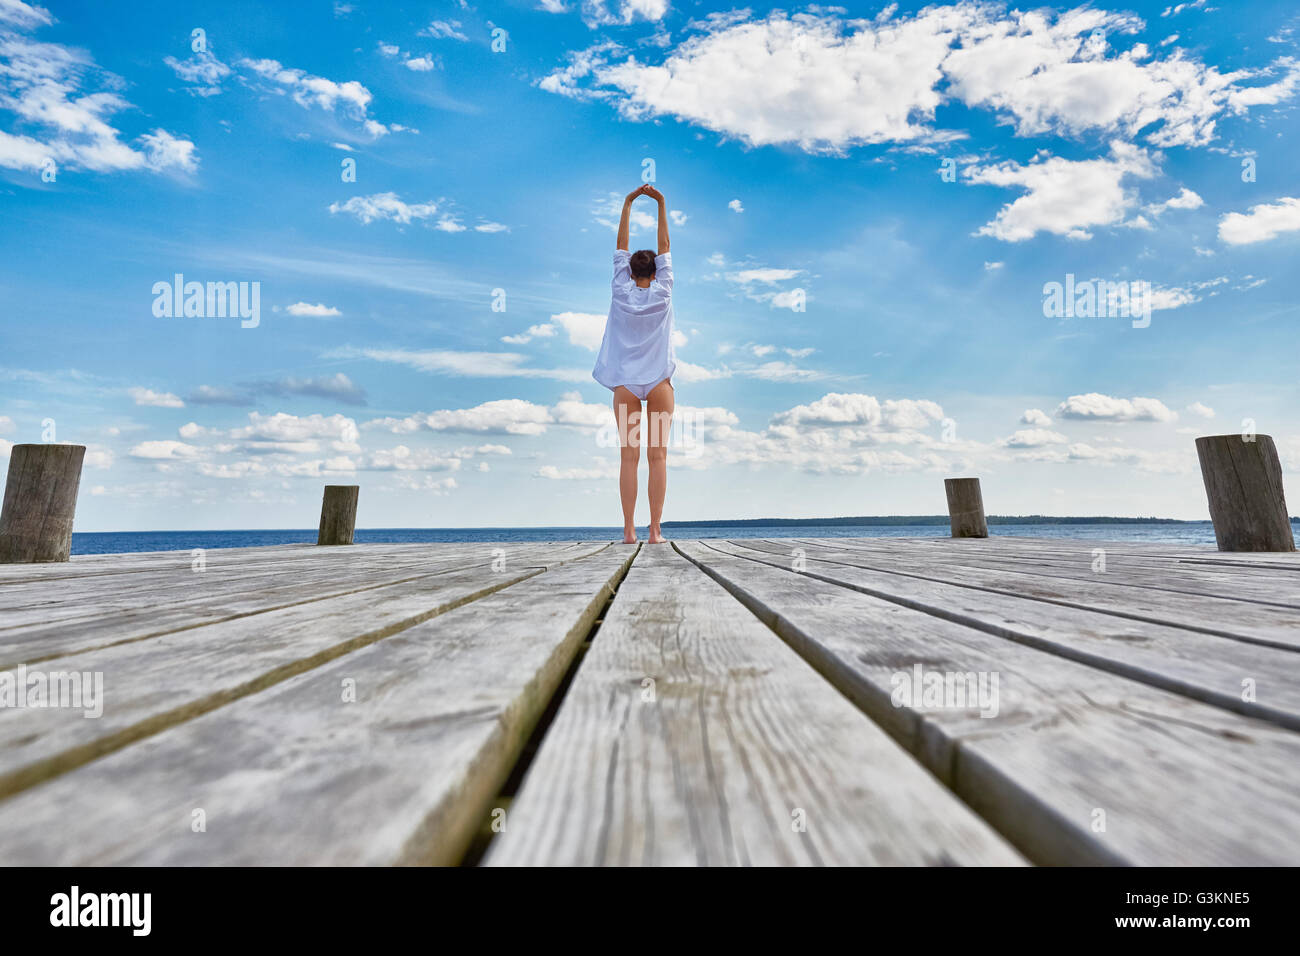 Young woman standing on wooden pier, stretching, rear view Stock Photo